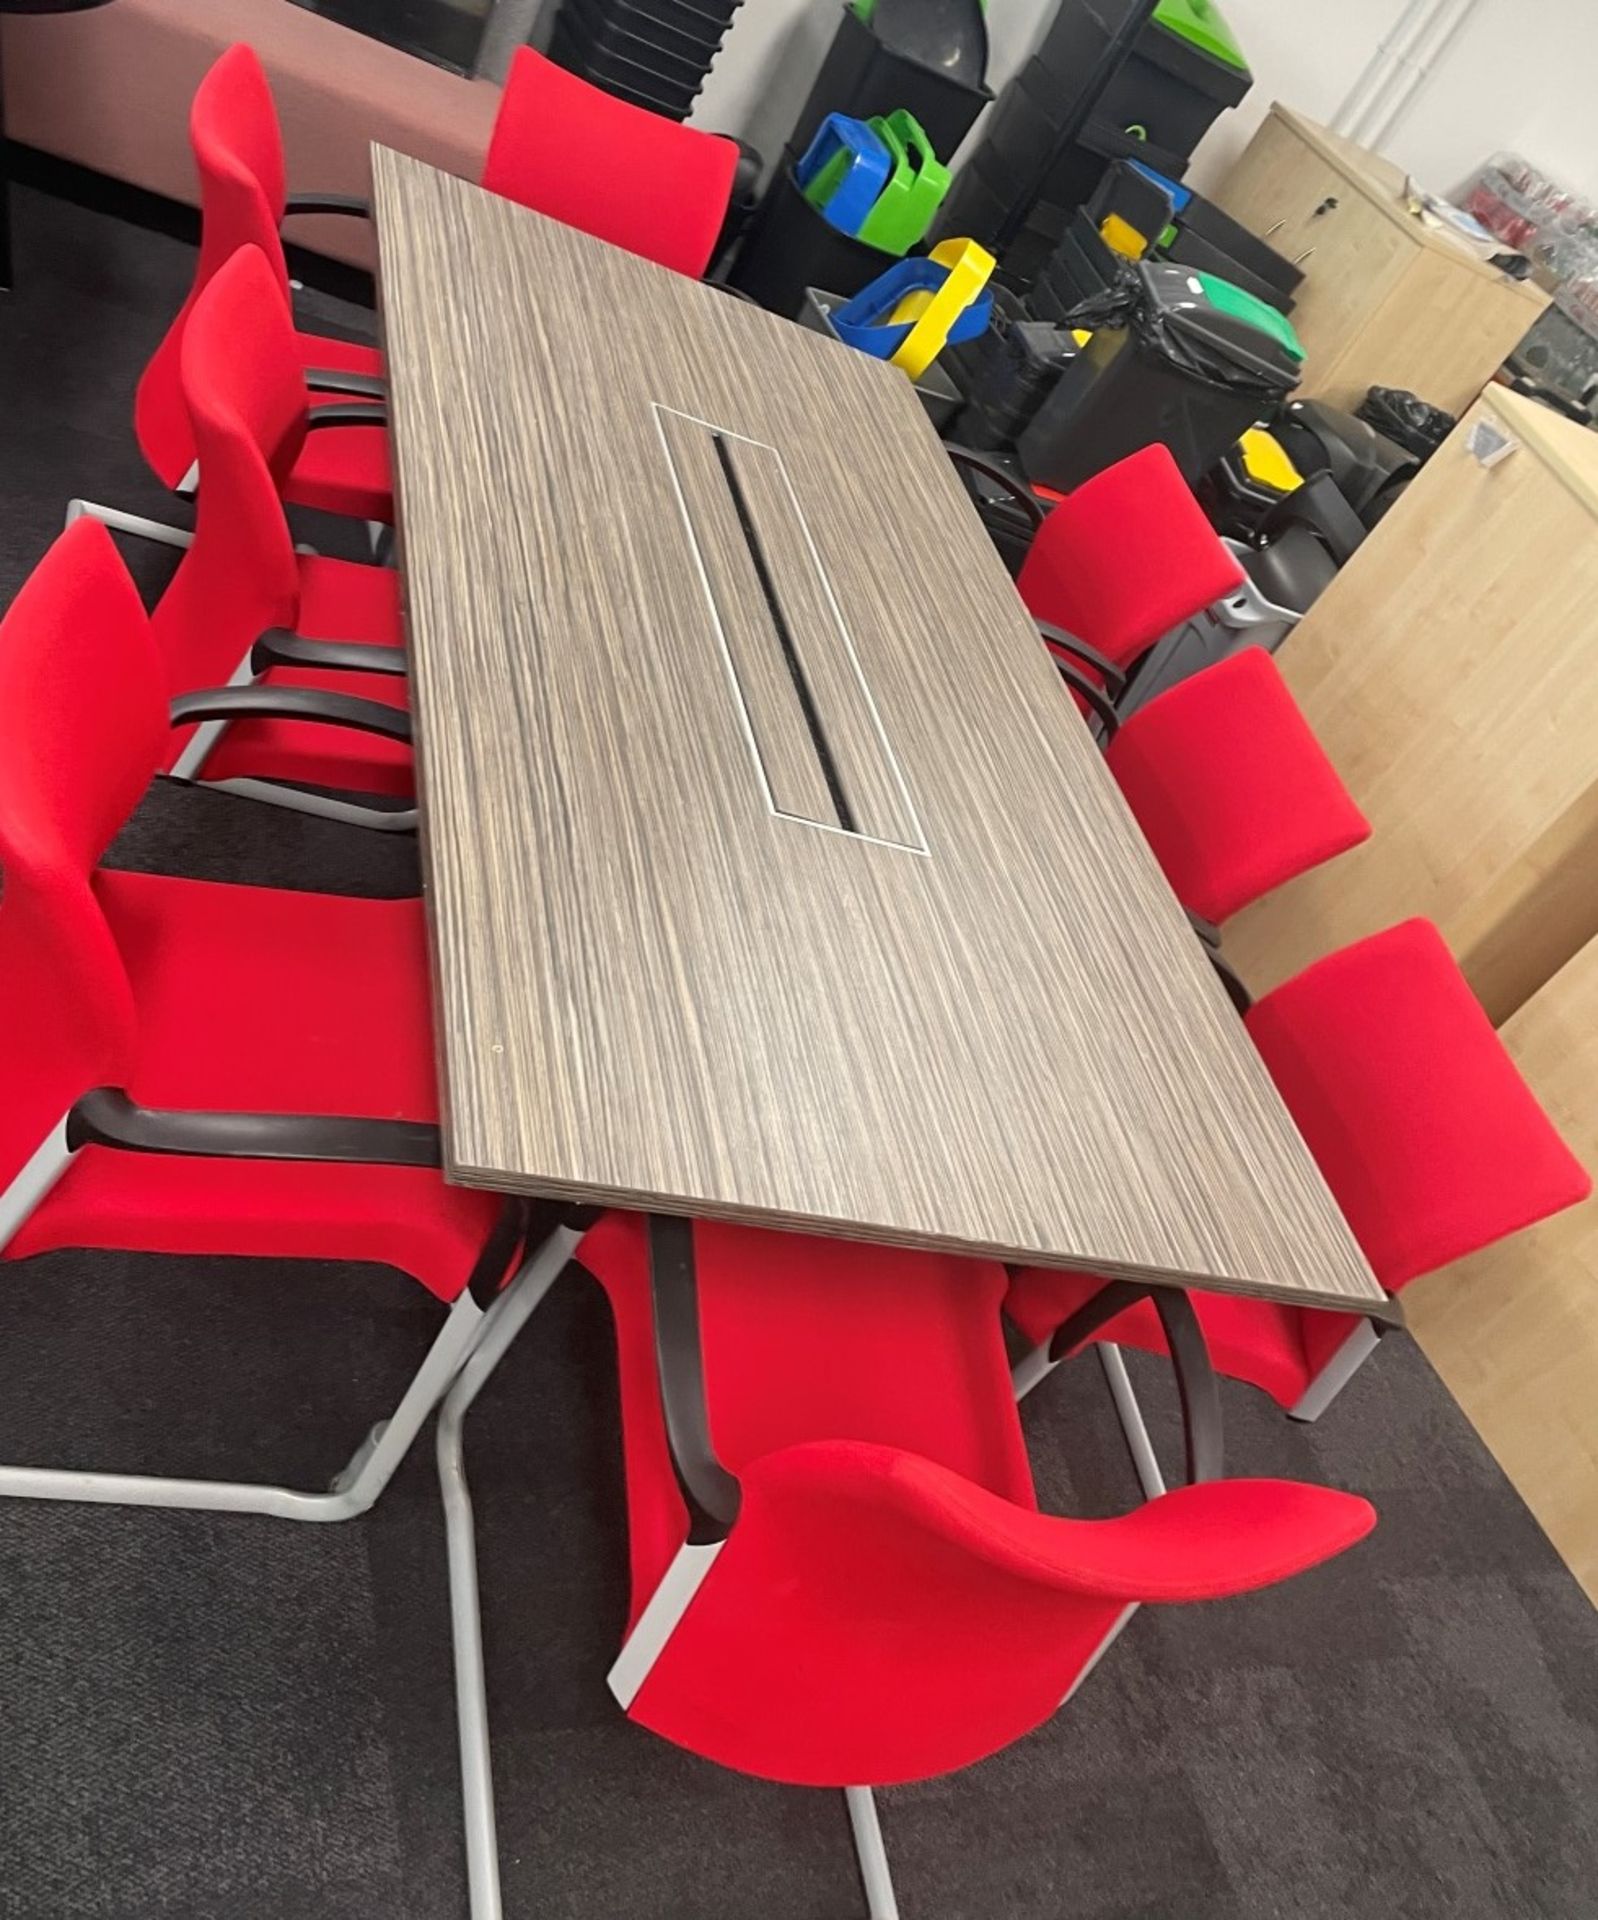 1 x 2-Metre Long Boardroom Table With 8 x Red Senator Chairs - To Be Removed From An Executive - Image 12 of 18